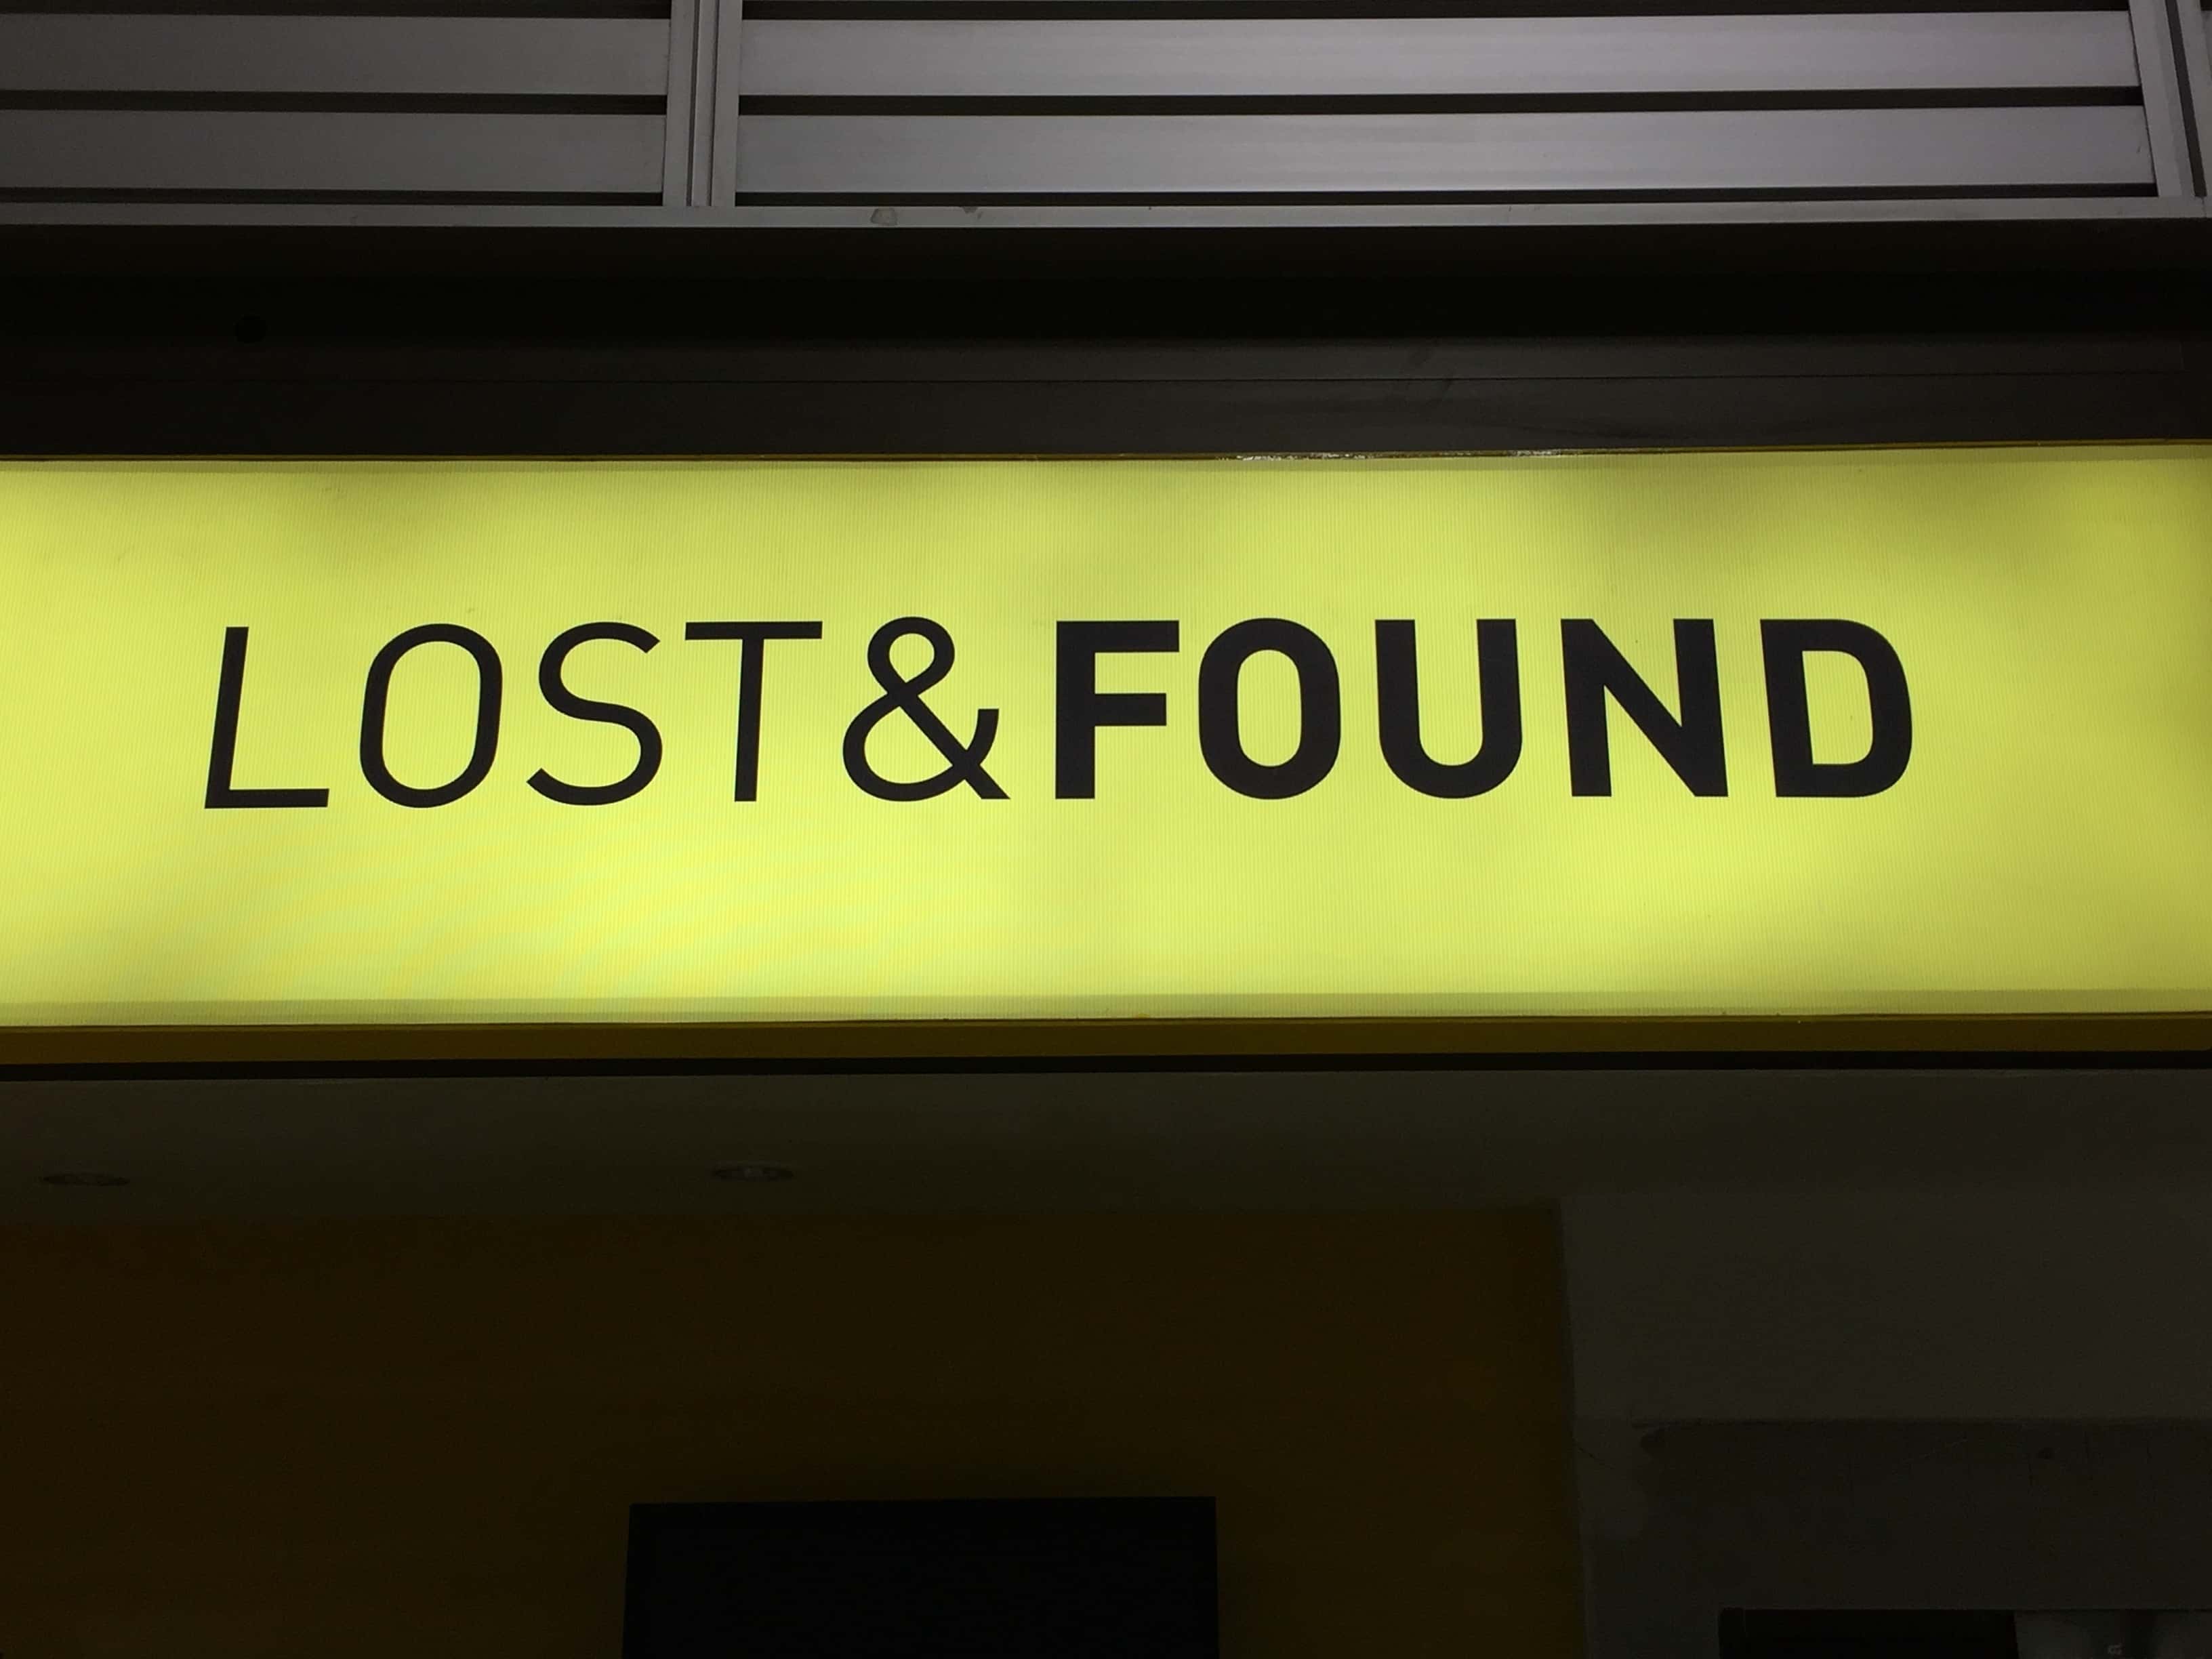 ACL lost and found opens up KLBJAM Austin, TX